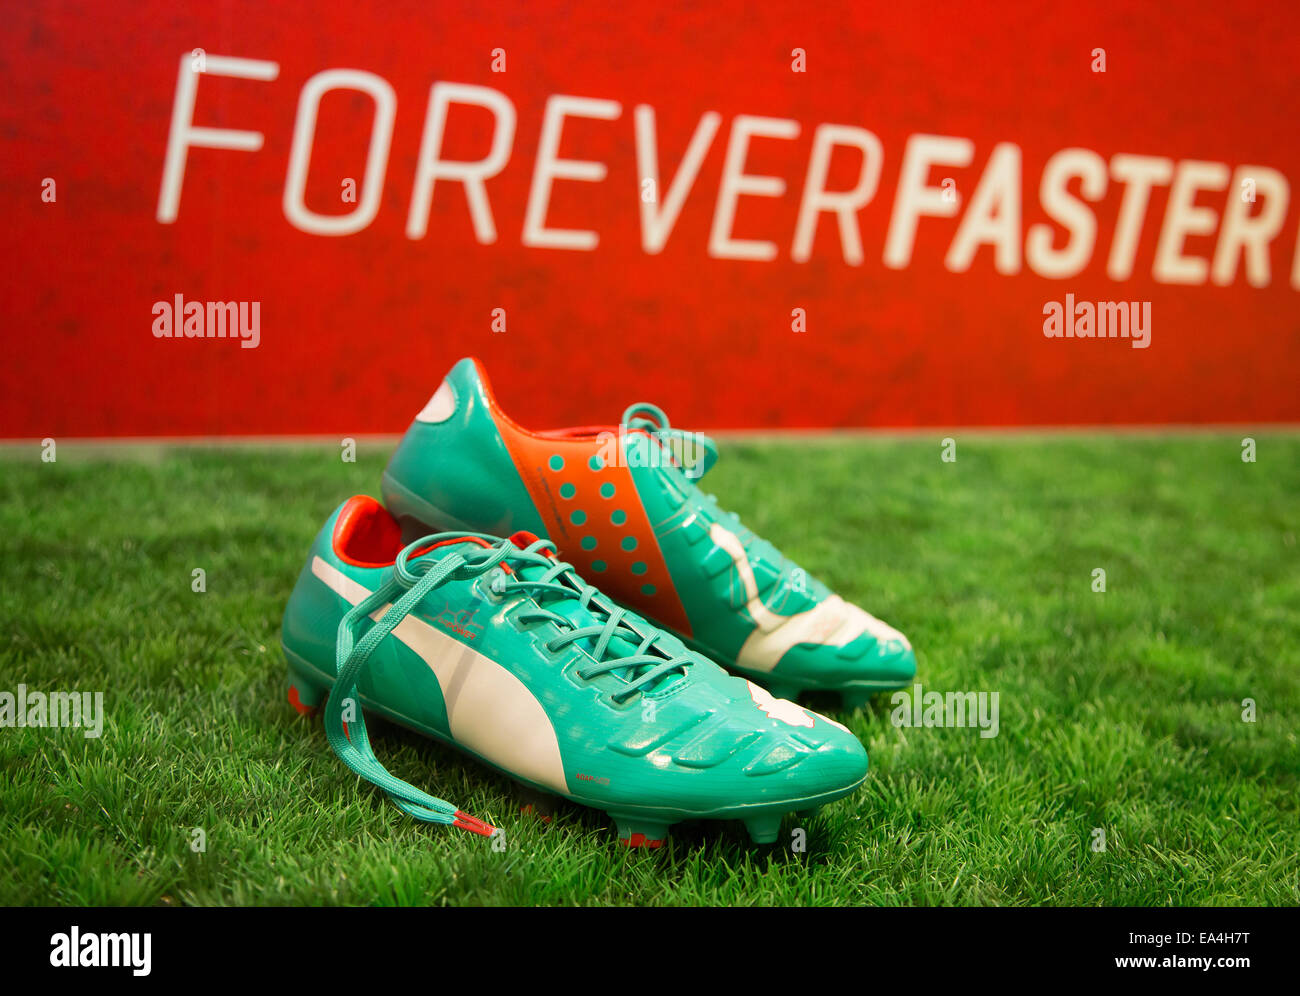 PUMA football boots evoPOWER lying on the grass with Forever Faster slogan  in the background. COMMERCIAL HANDOUT/EDITORIAL USE ONLY/NO SALES. Please  quote the source: 